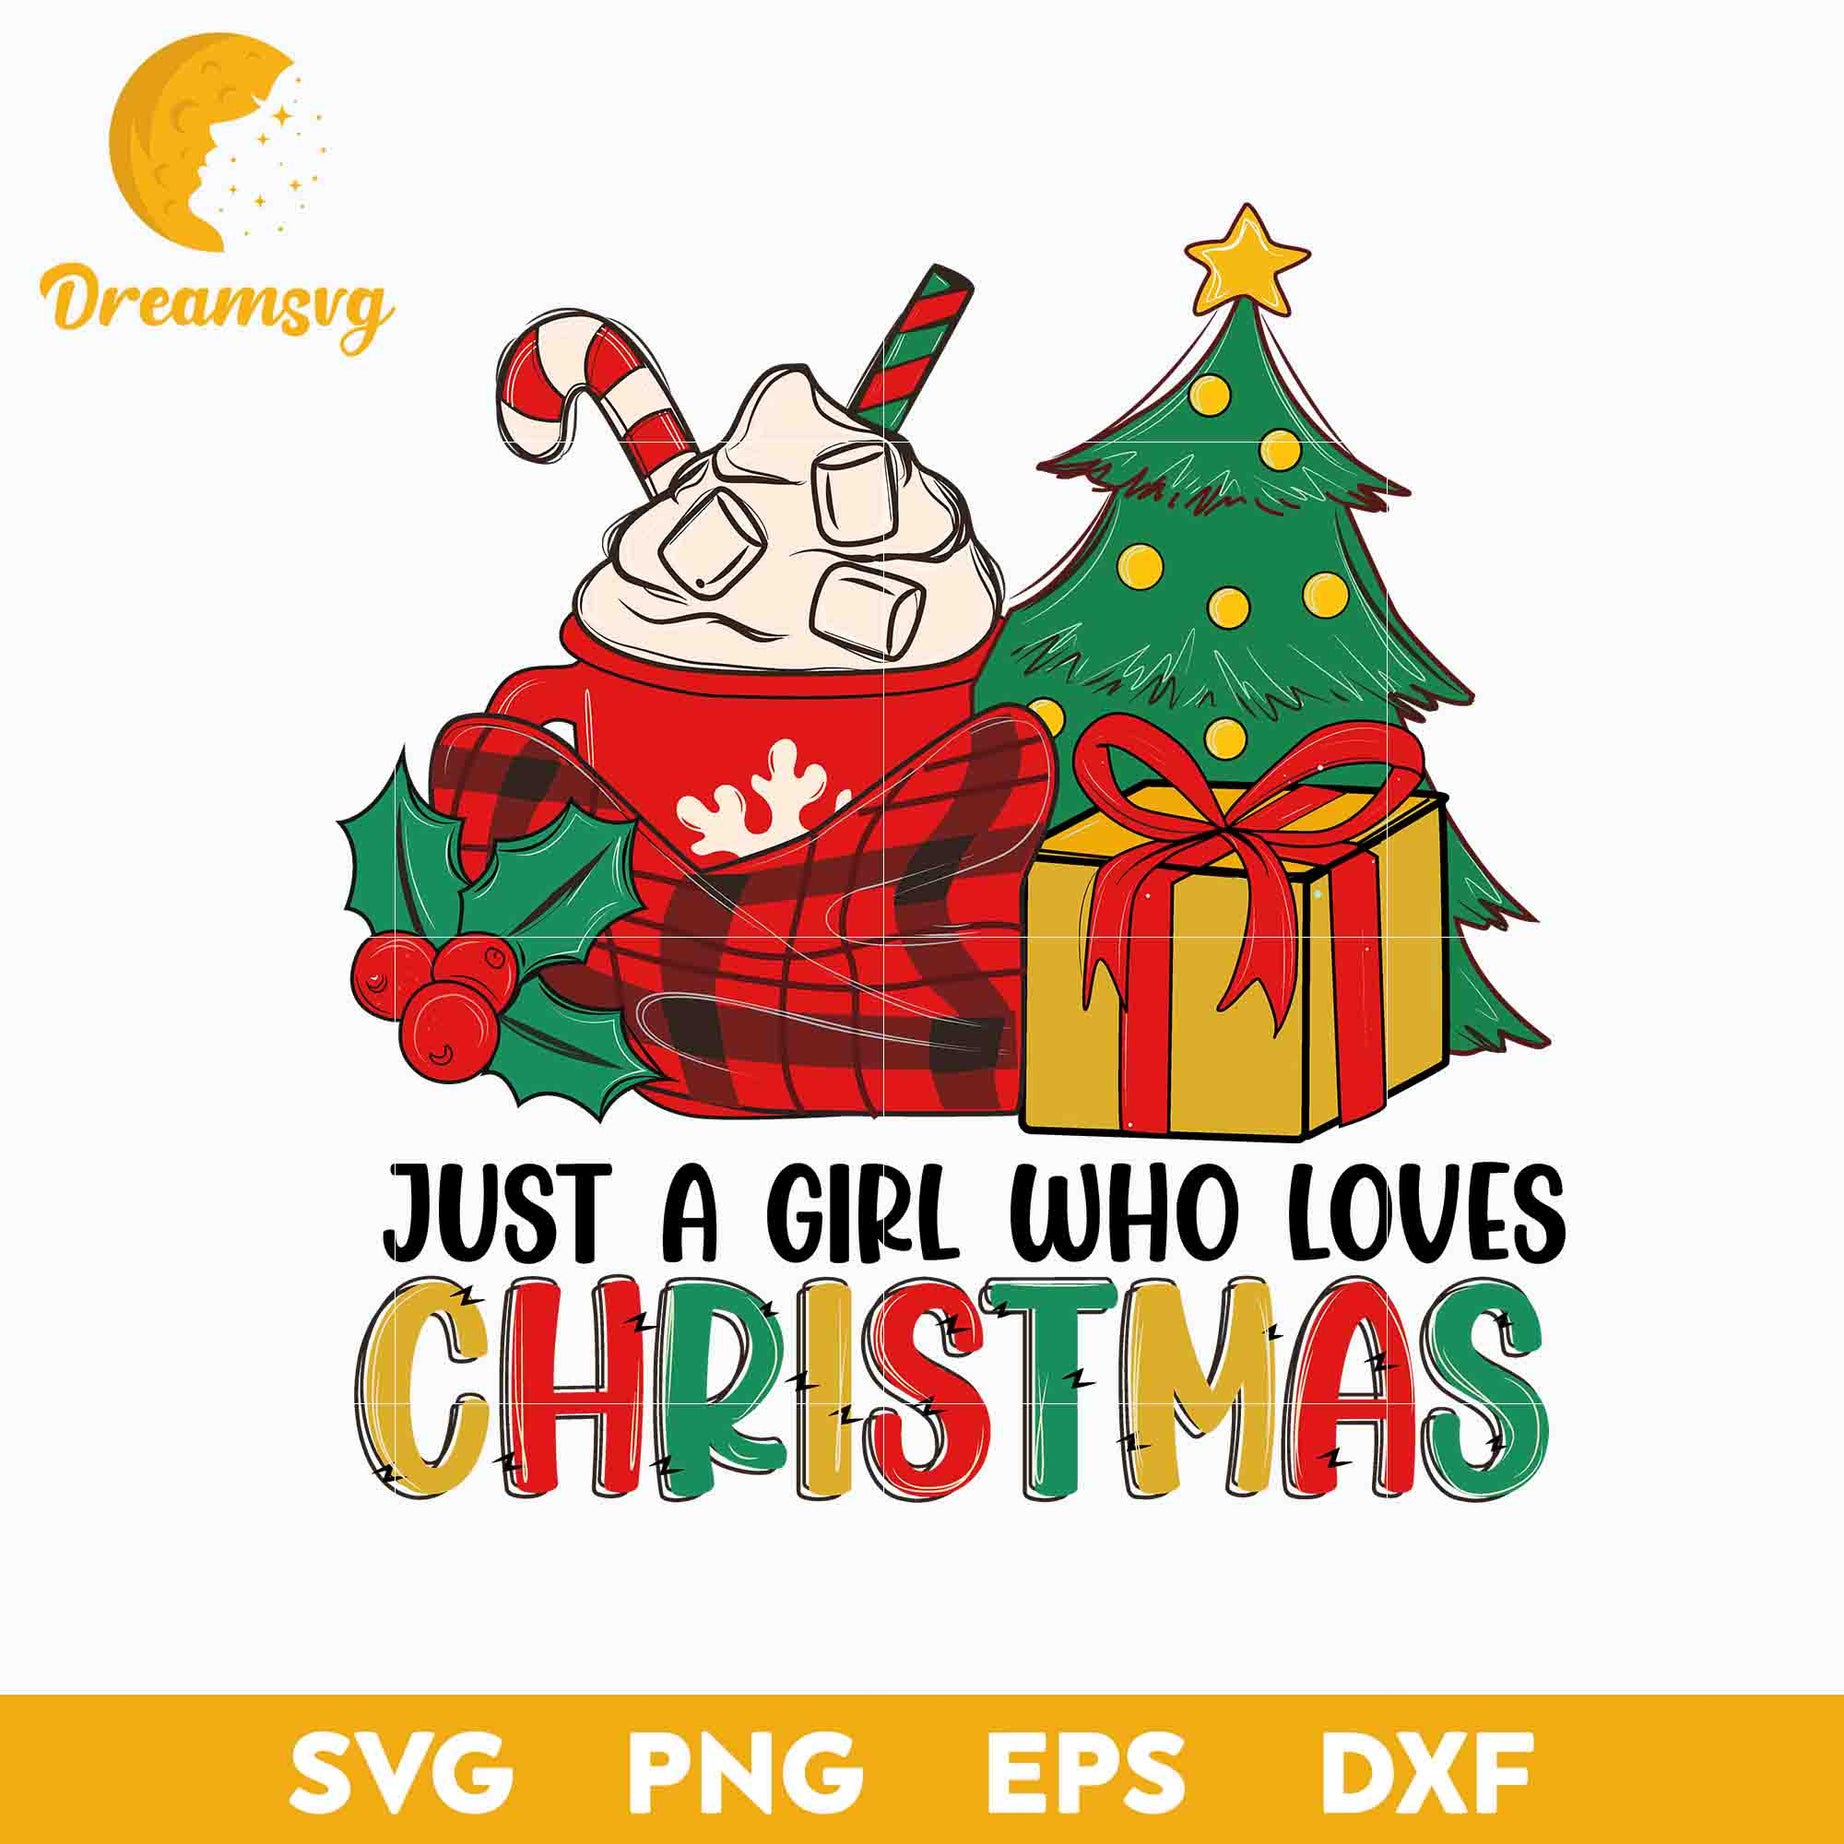 Just A Girl Who Loves Christmas SVG, Christmas Coffee SVG.